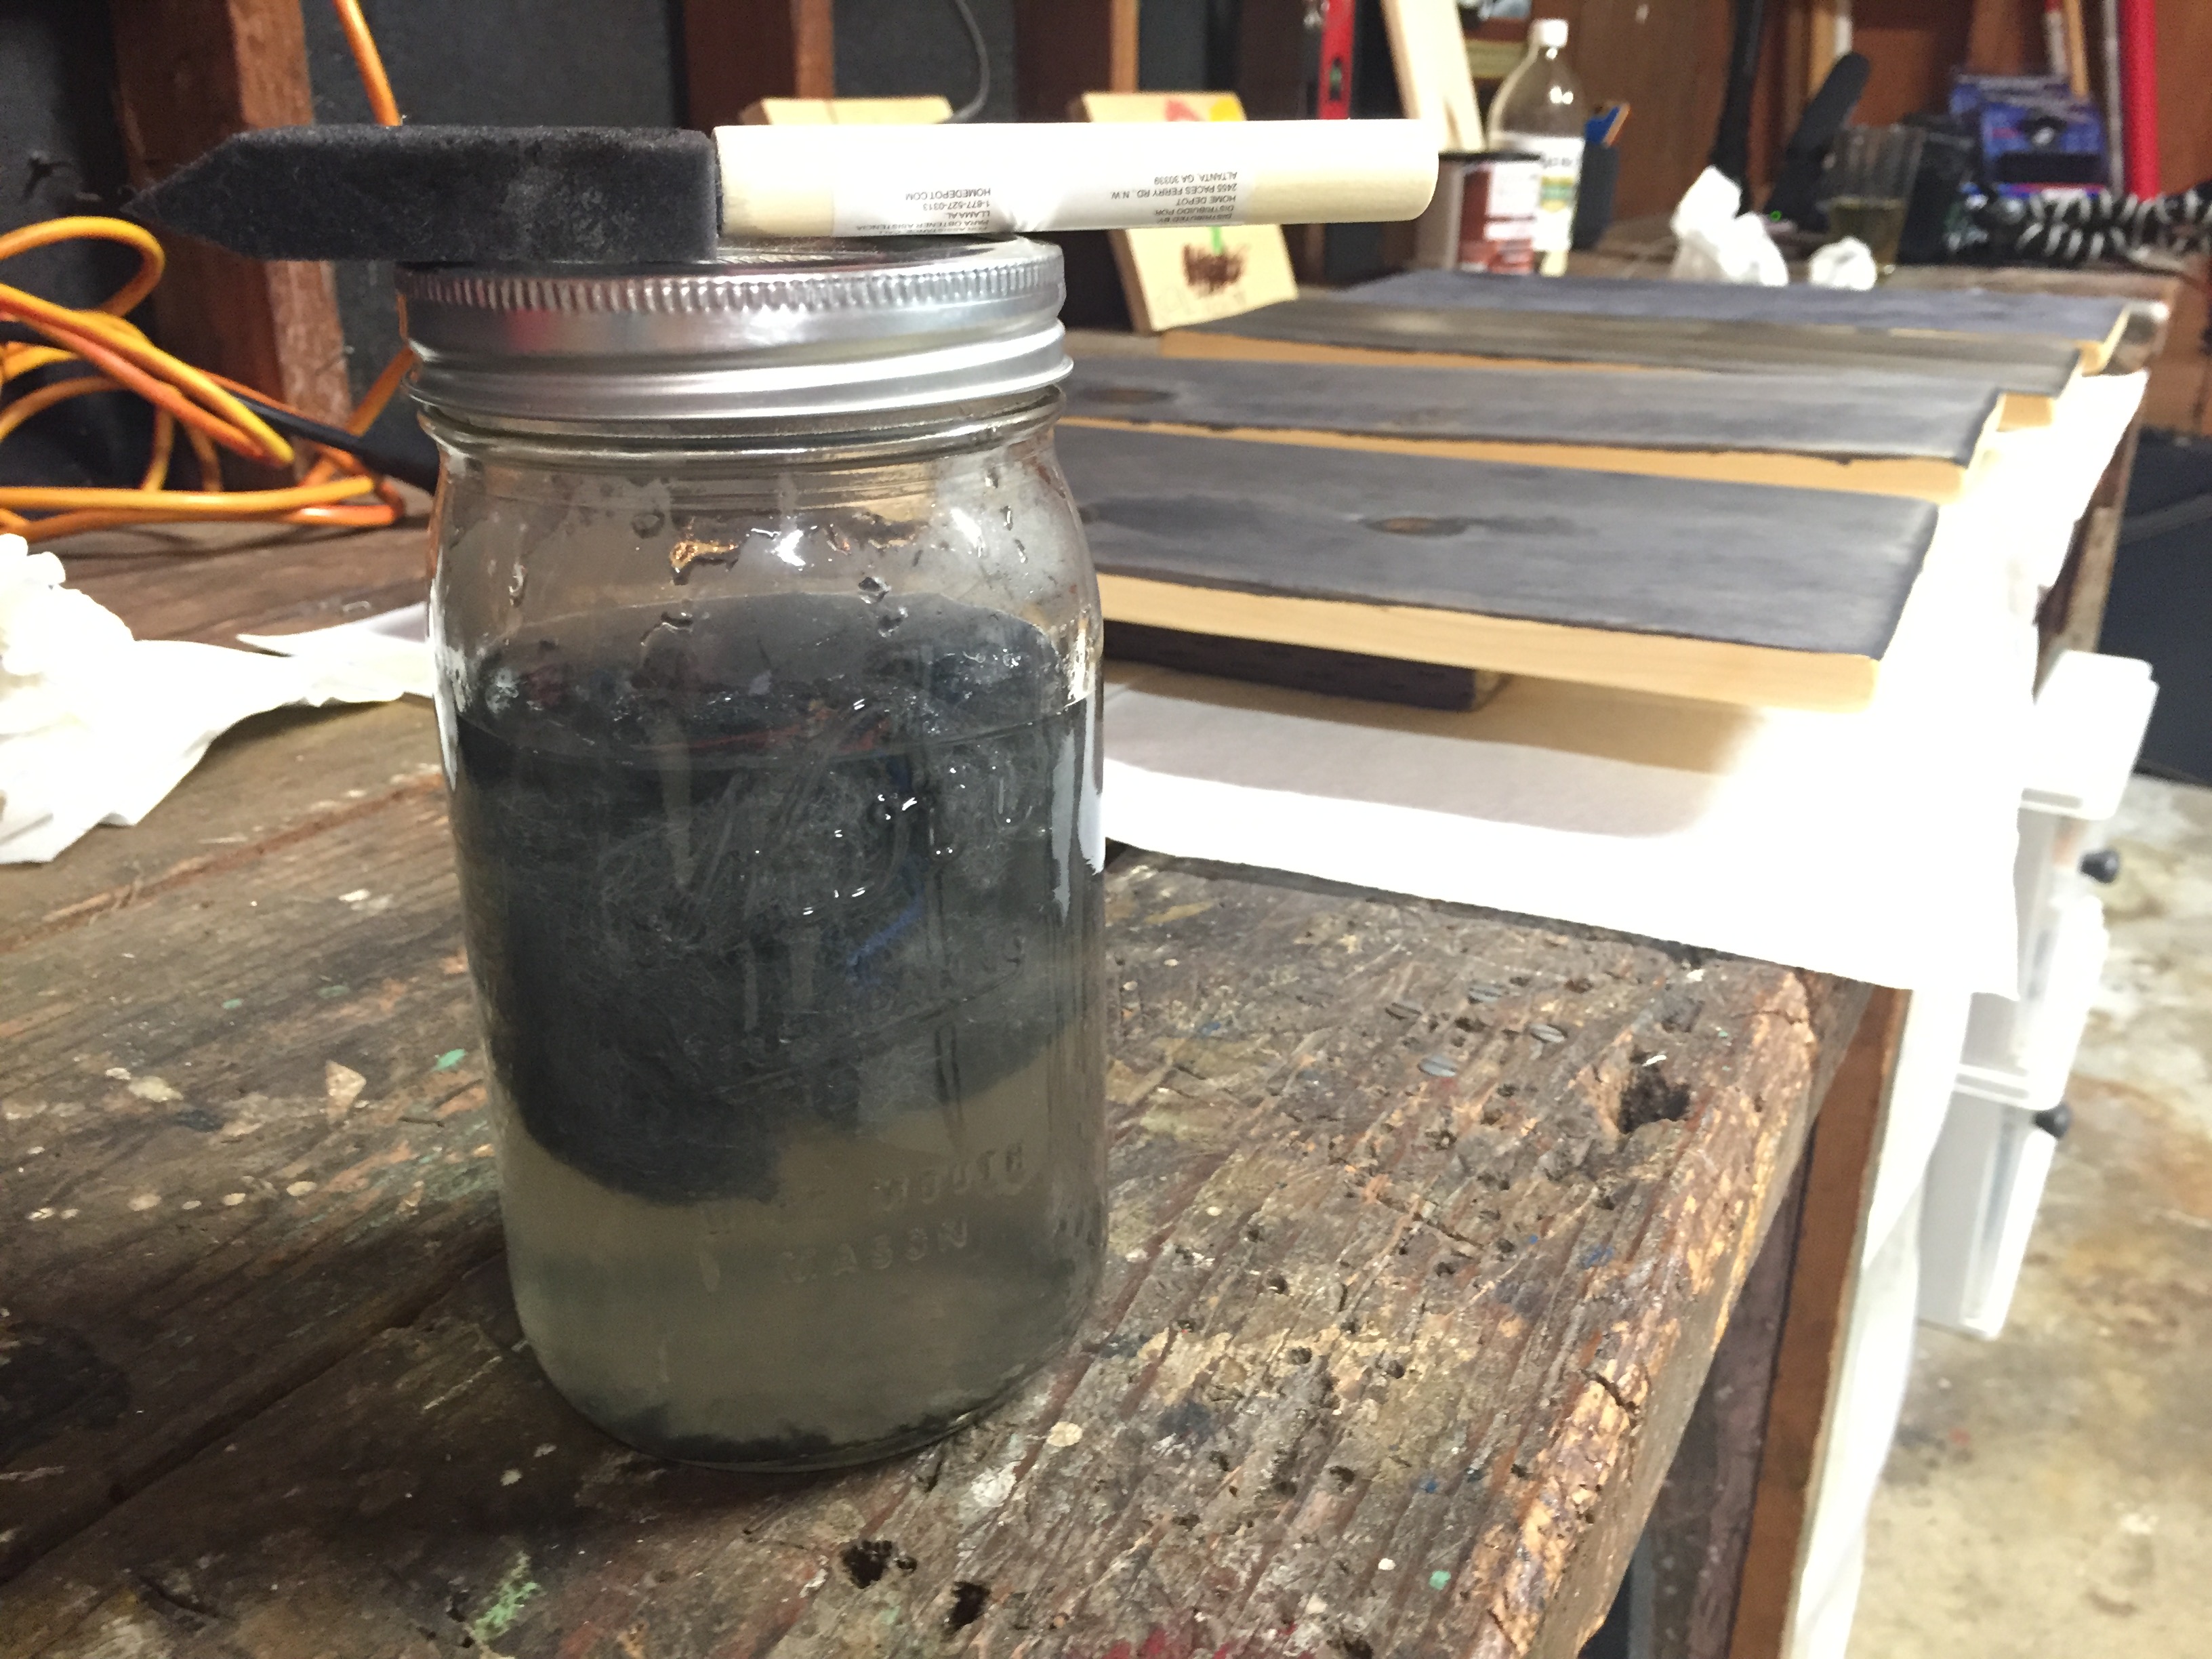 oxidation solution of steel wool and vinegar sitting on a workbench